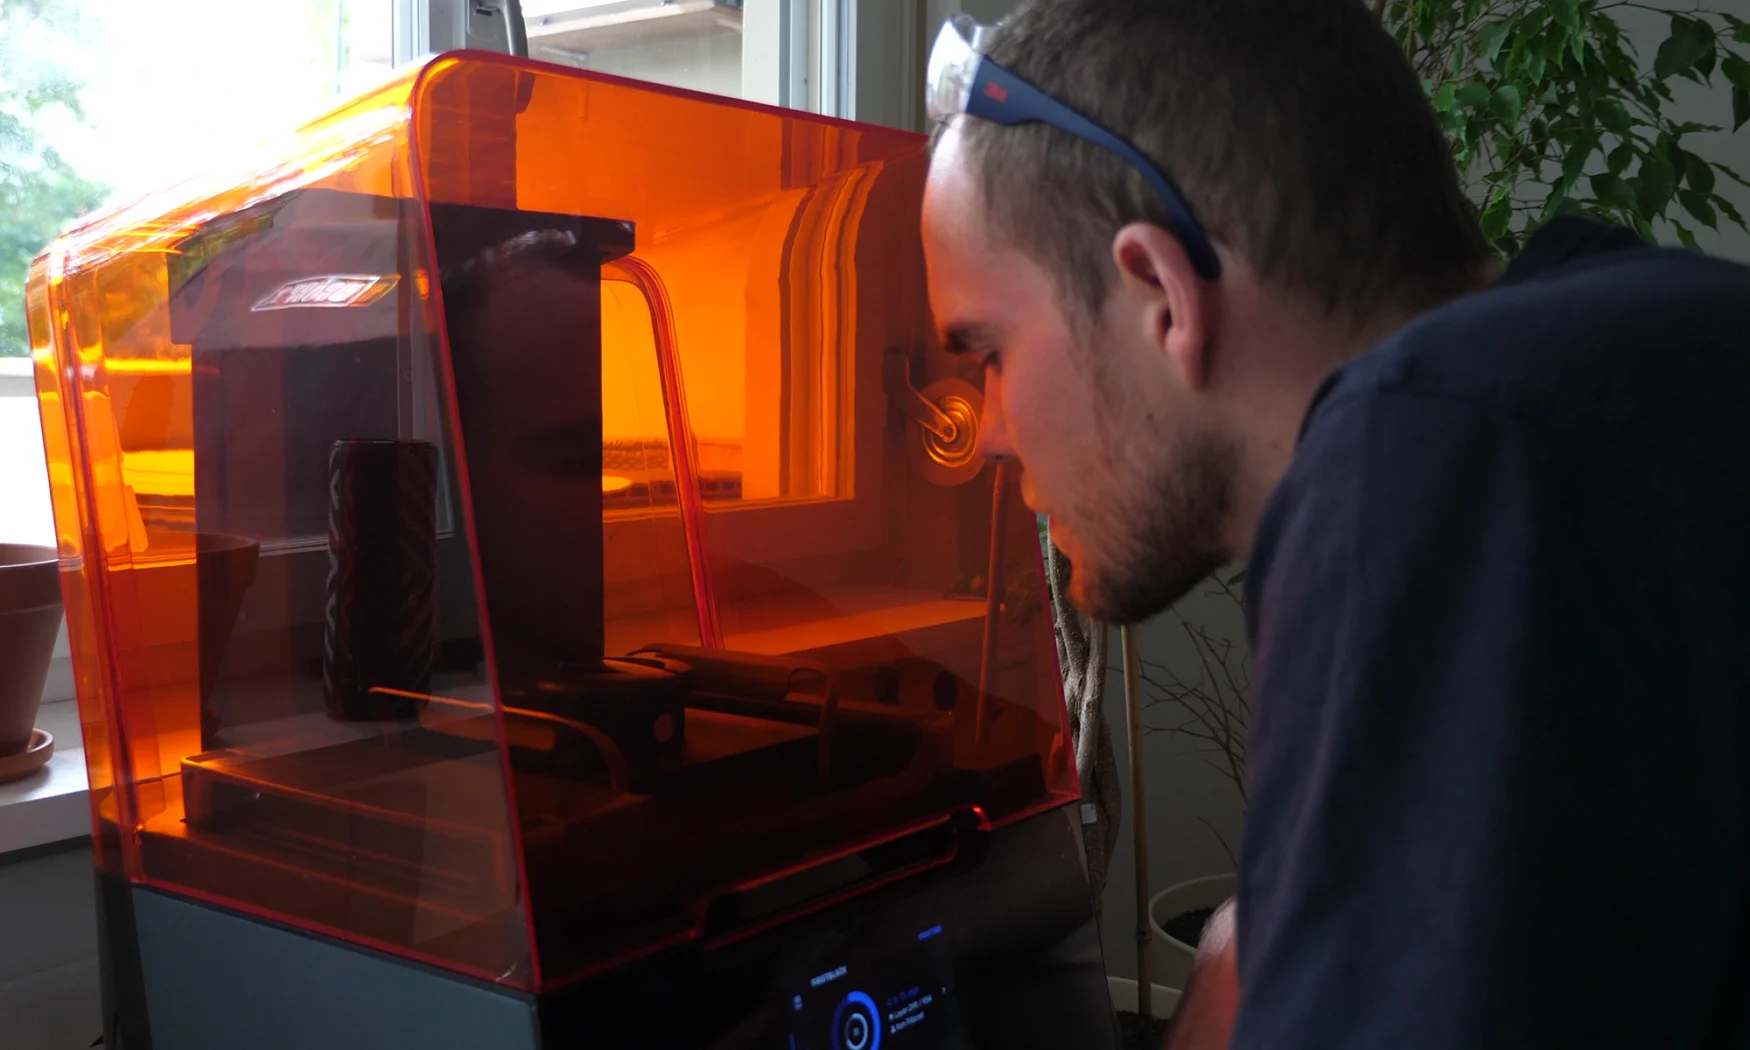 Engineer Ken Pillonel working with a 3D printer. He is to the right / front of the printer, looking inside of it.